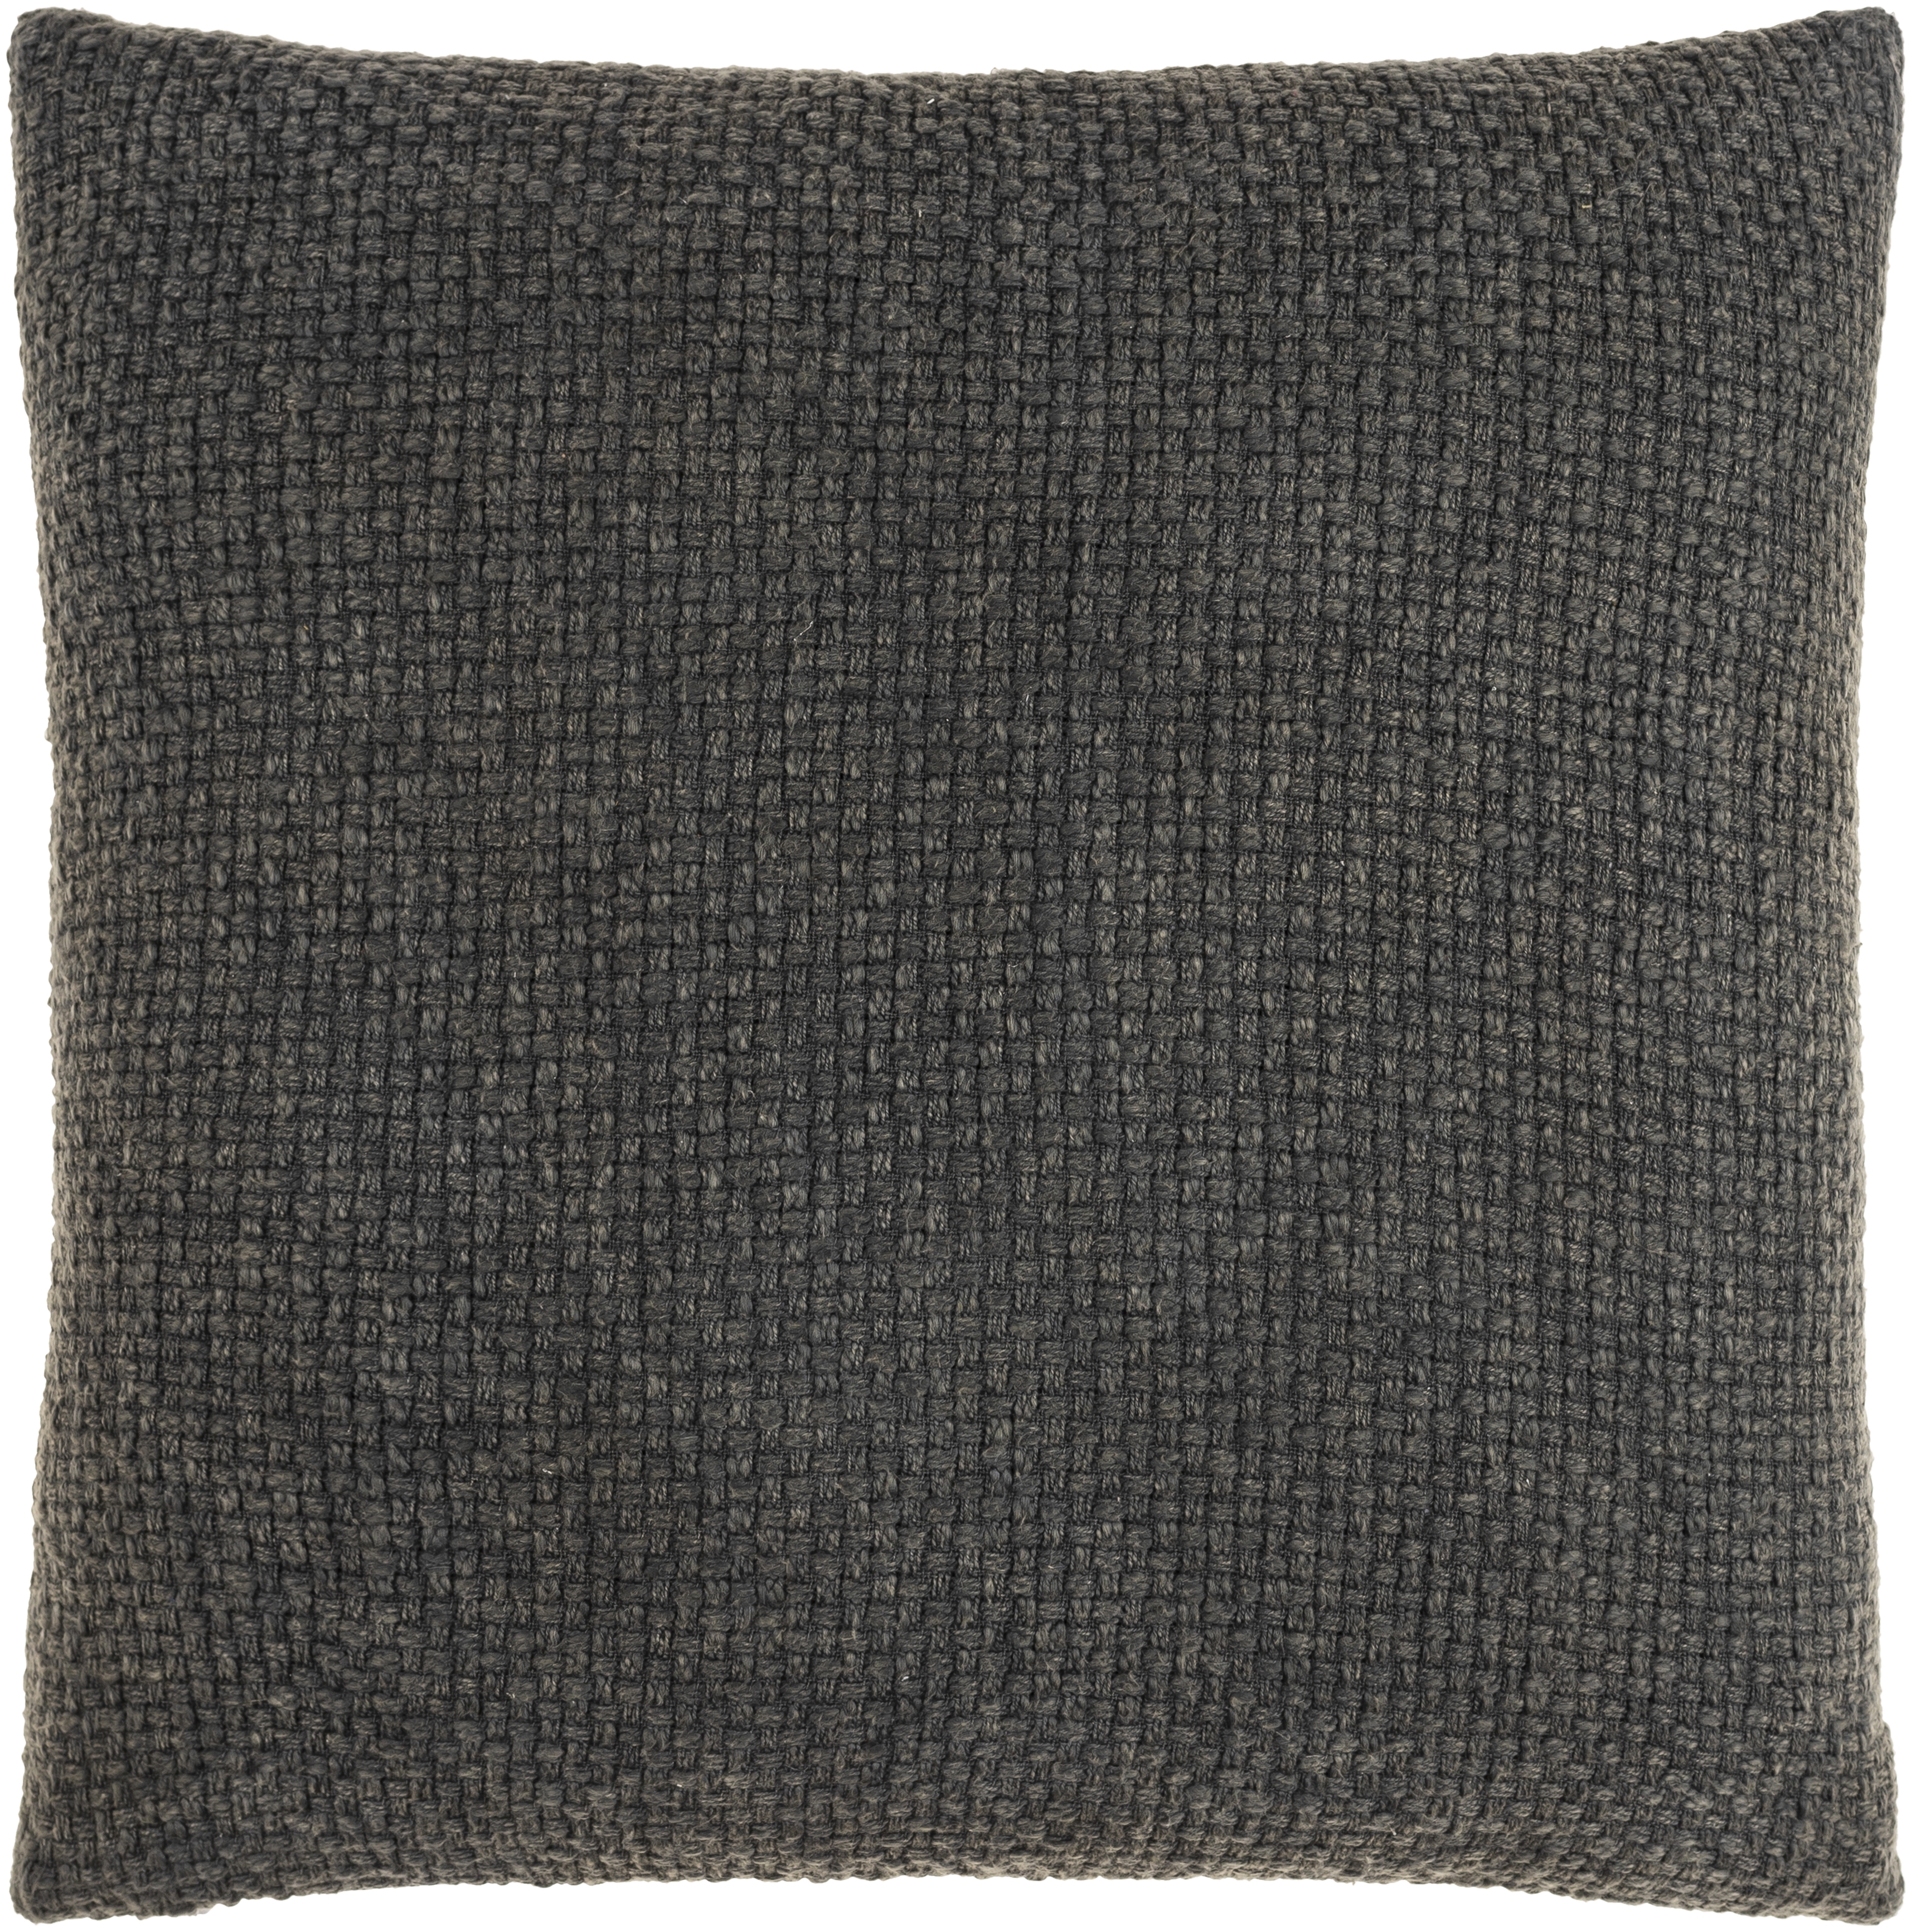 Washed Texture Throw Pillow, 20" x 20", with poly insert - Image 0